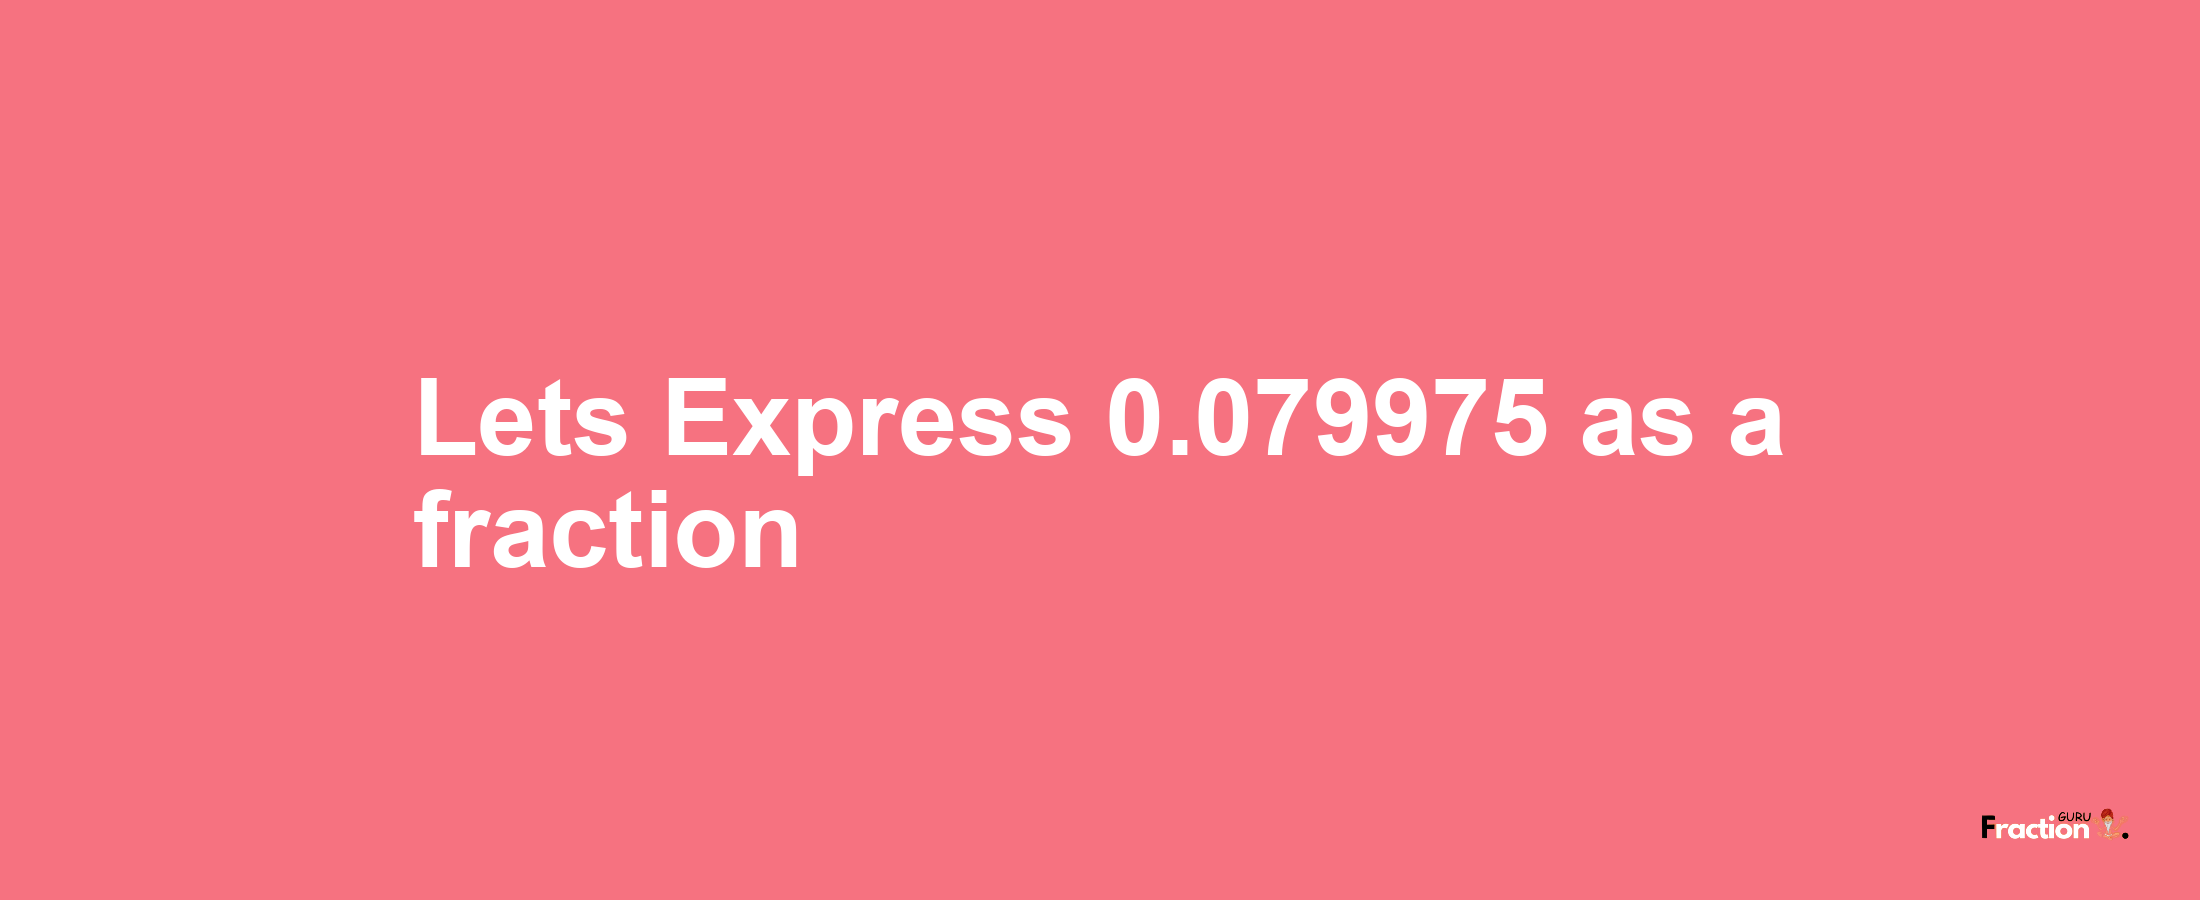 Lets Express 0.079975 as afraction